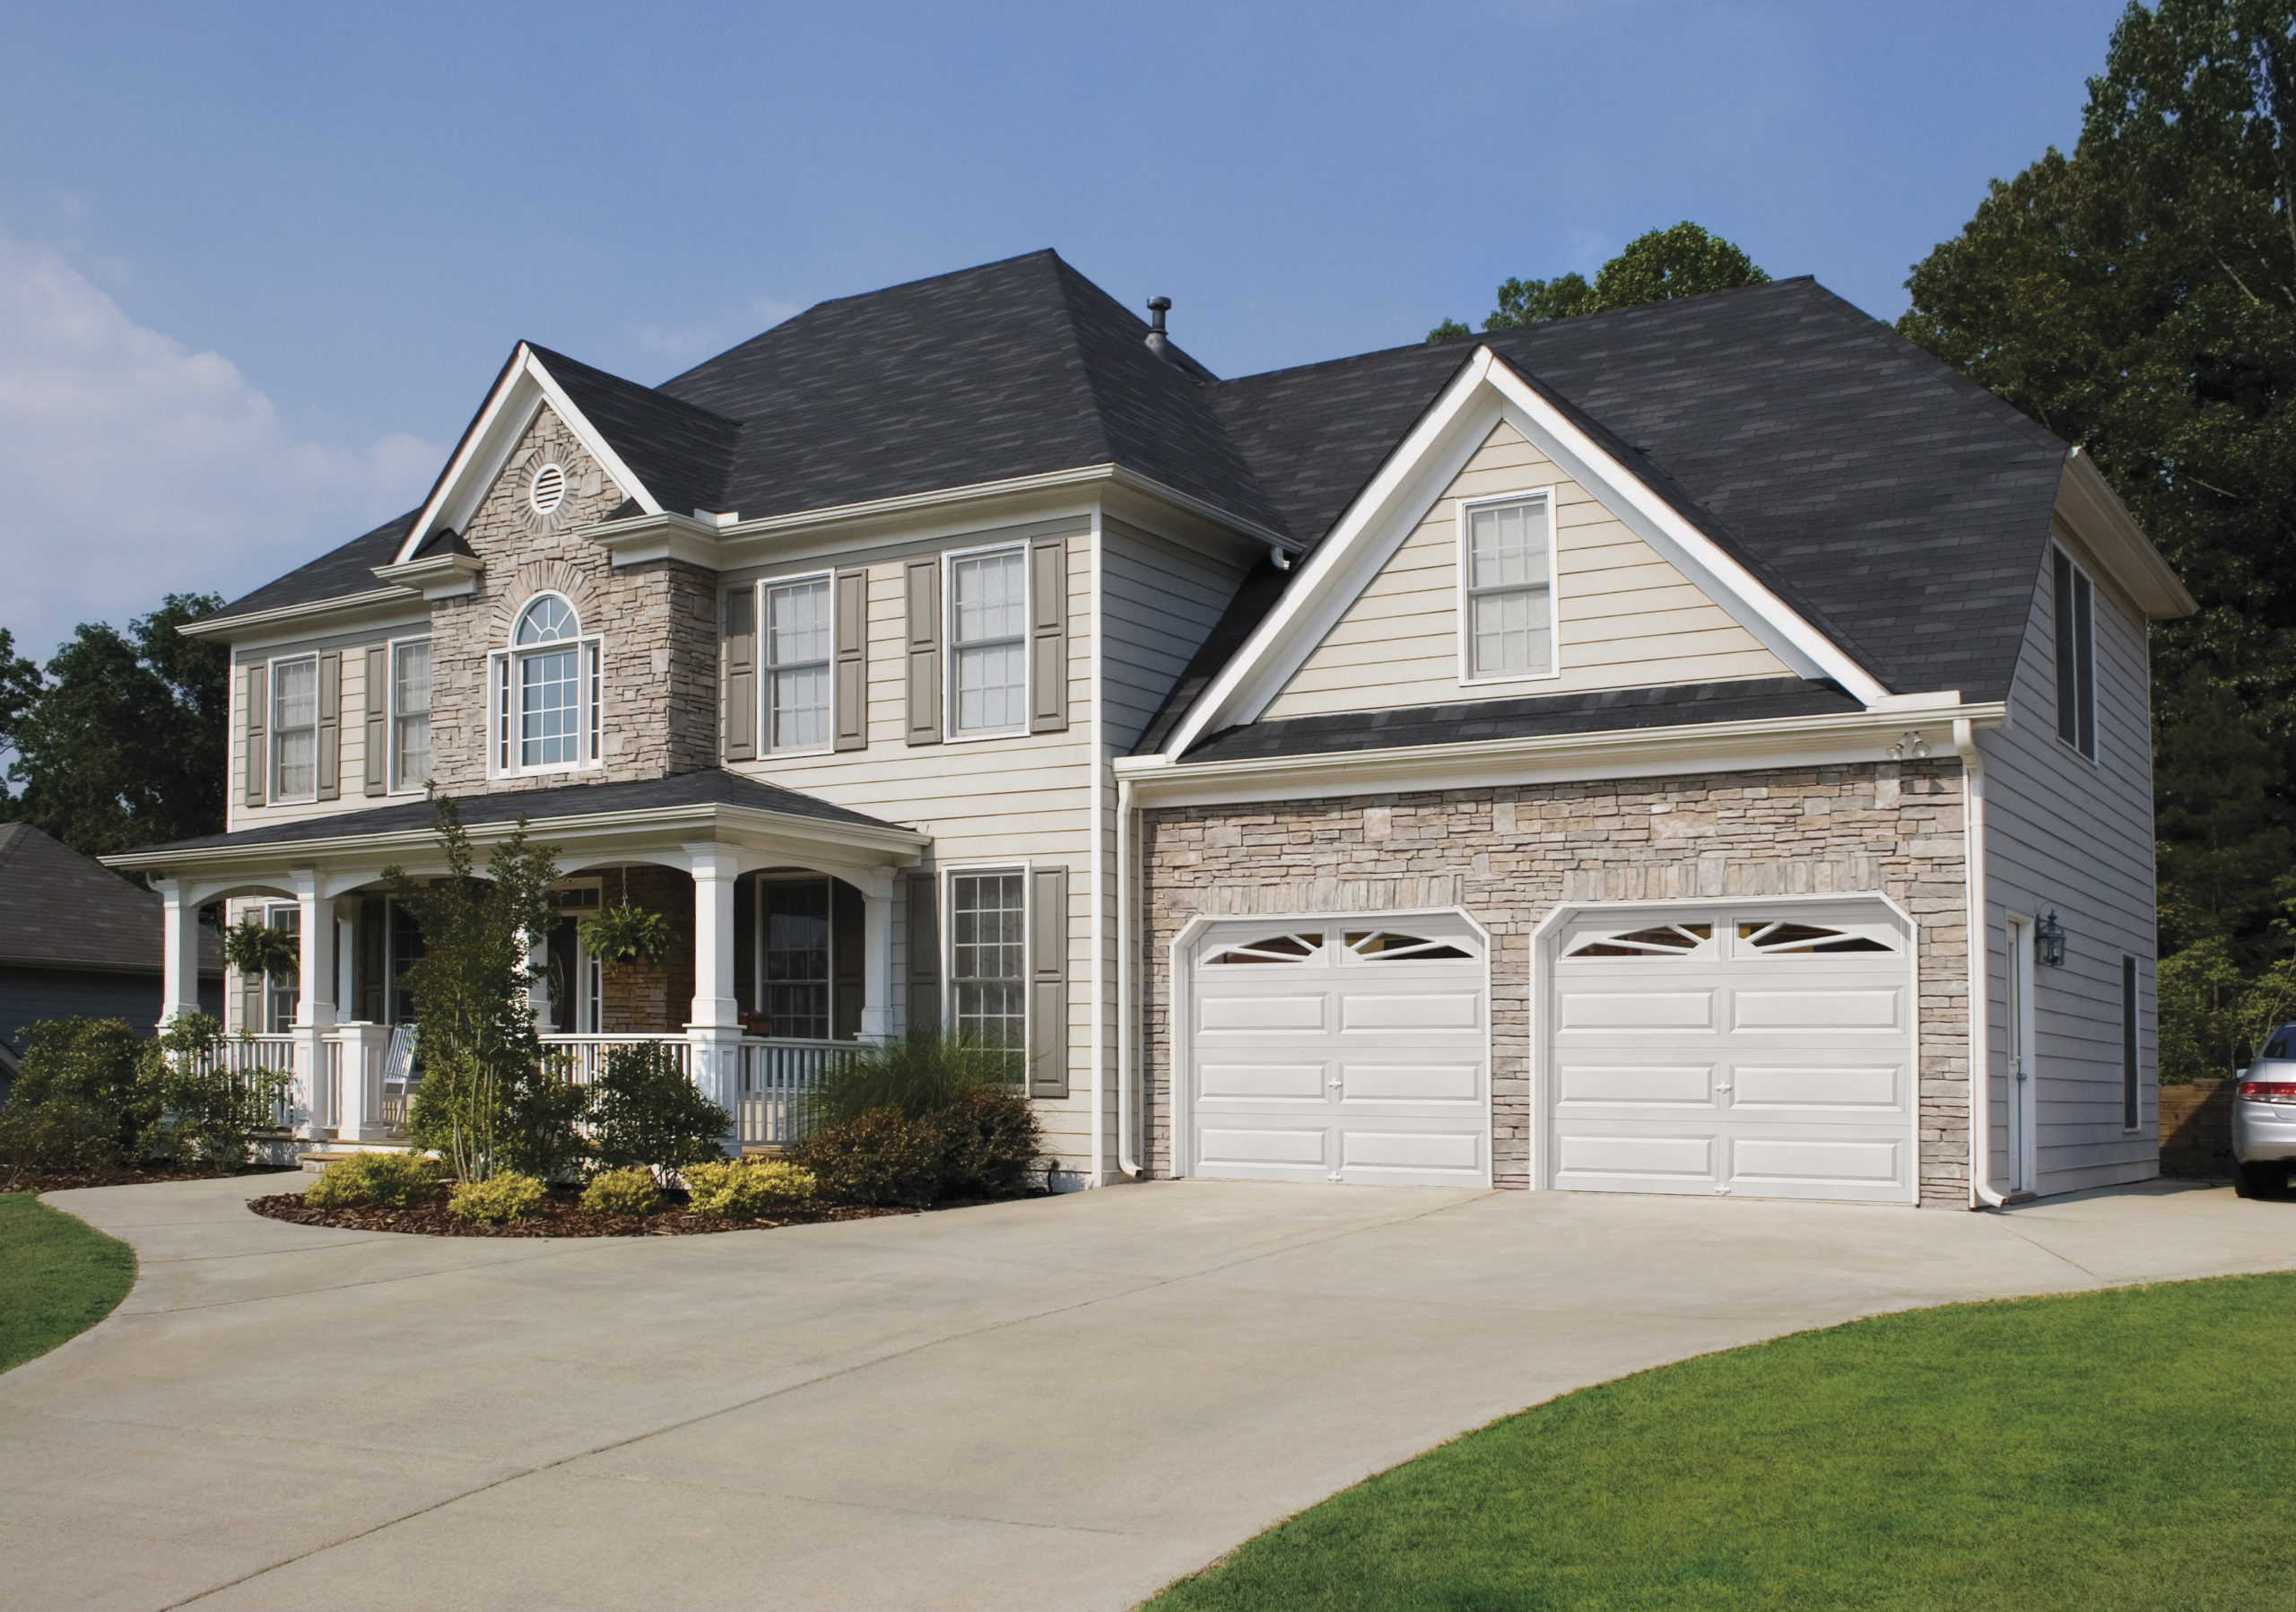 clipped corner garage doors with windows by clopay